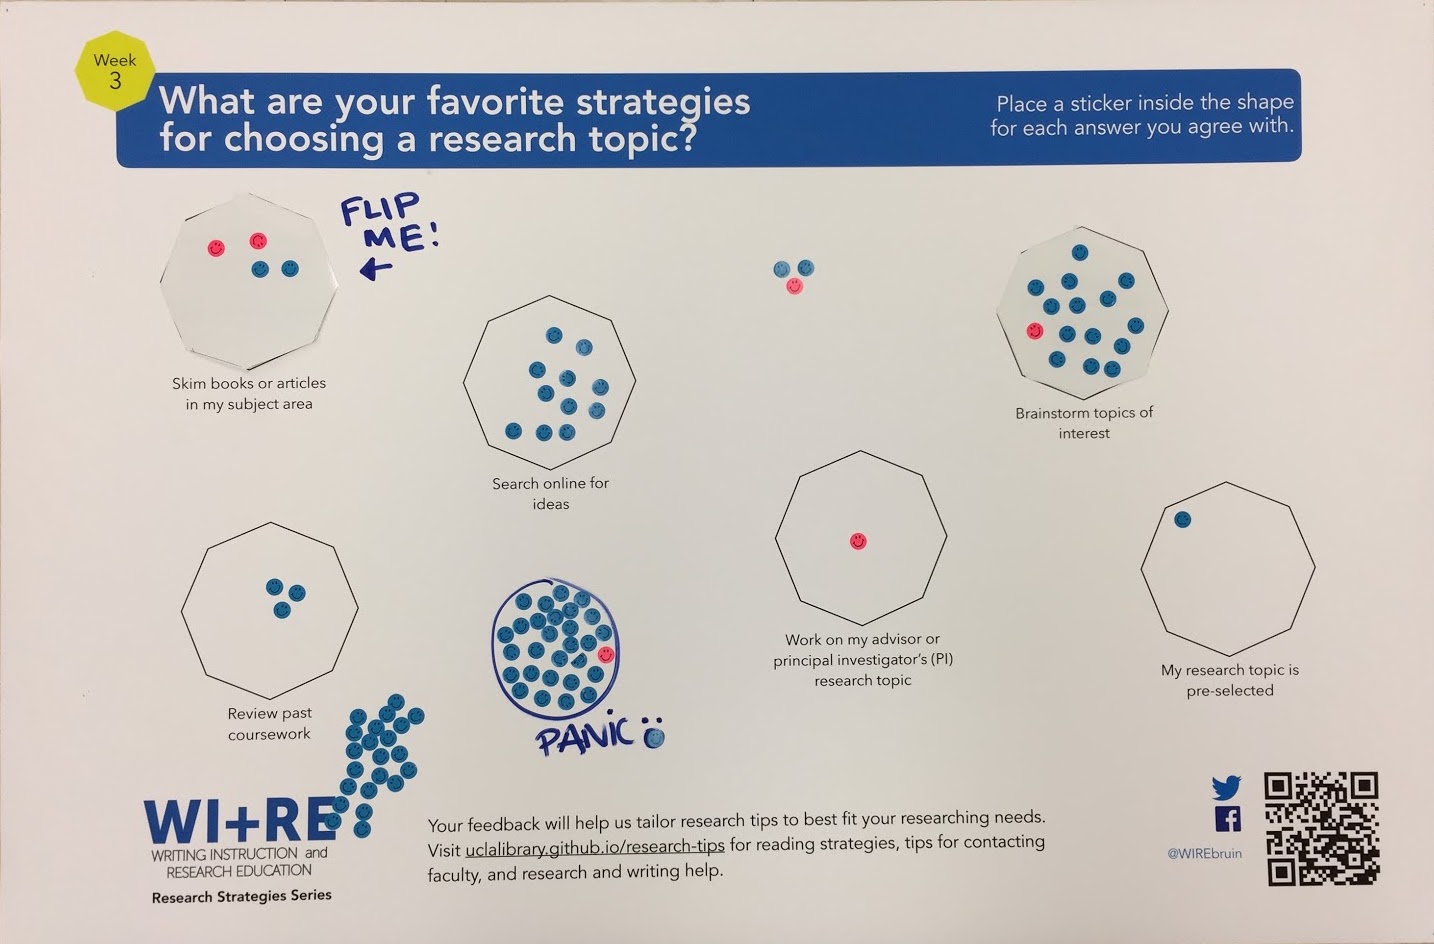 A poster from the Research Strategies Poster Series